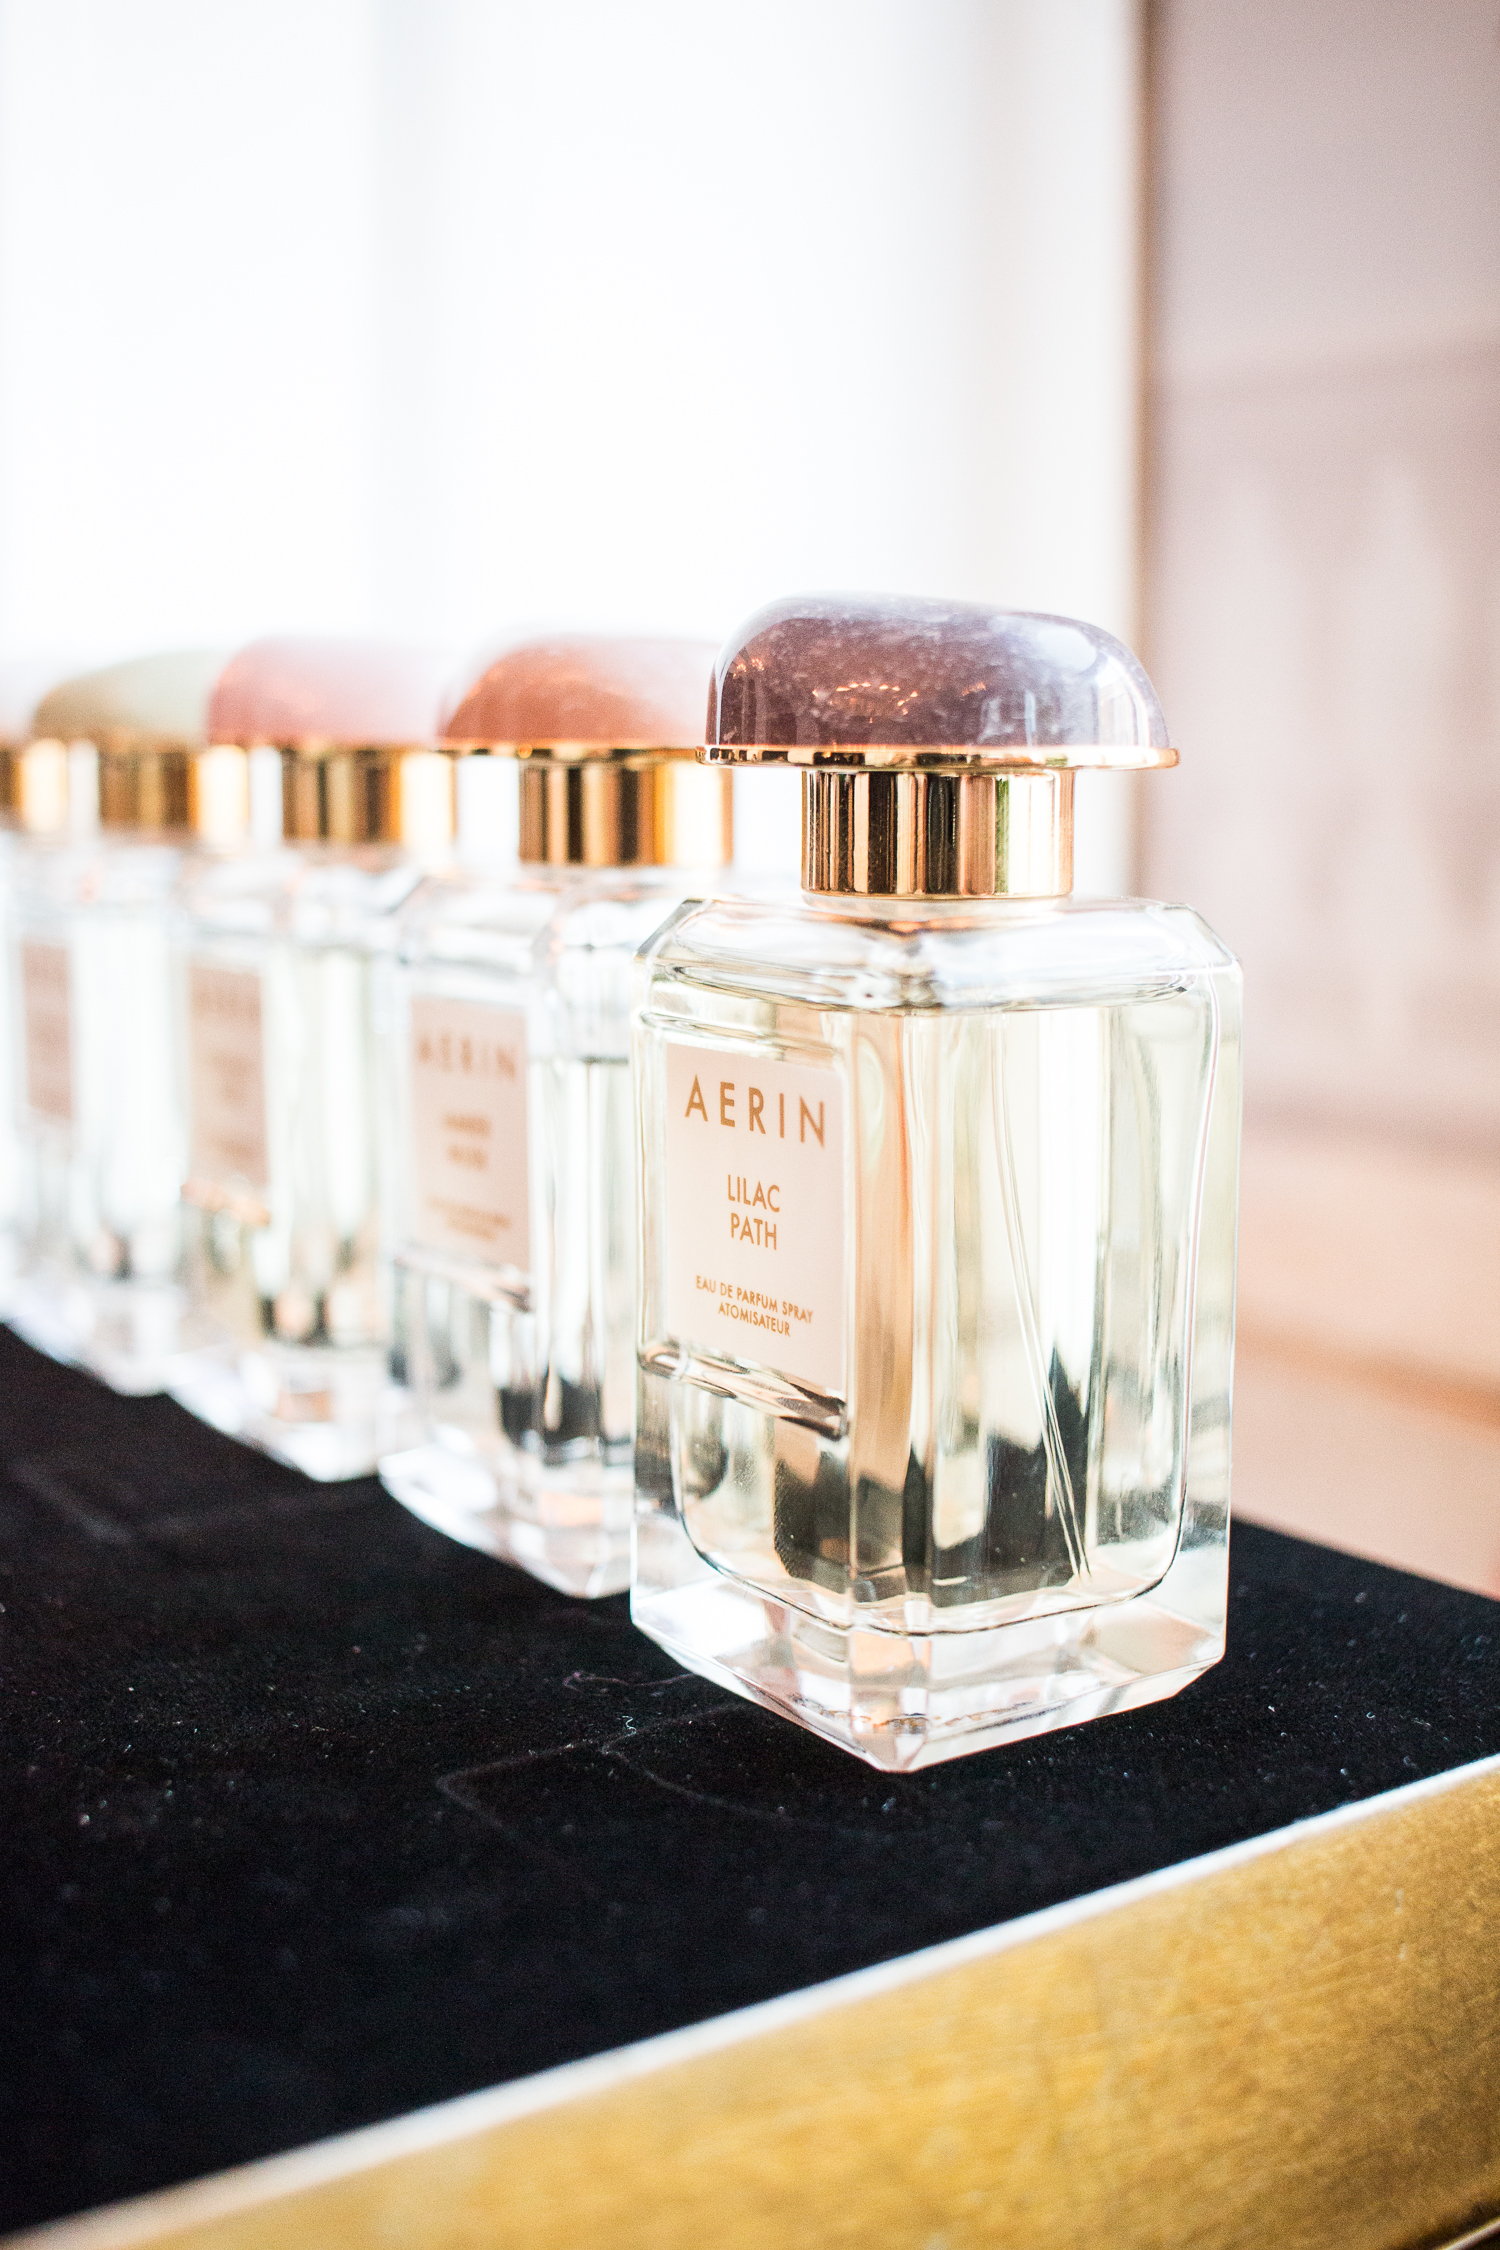 Beauty News: AERIN Afternoon Tea | Love Daily Dose